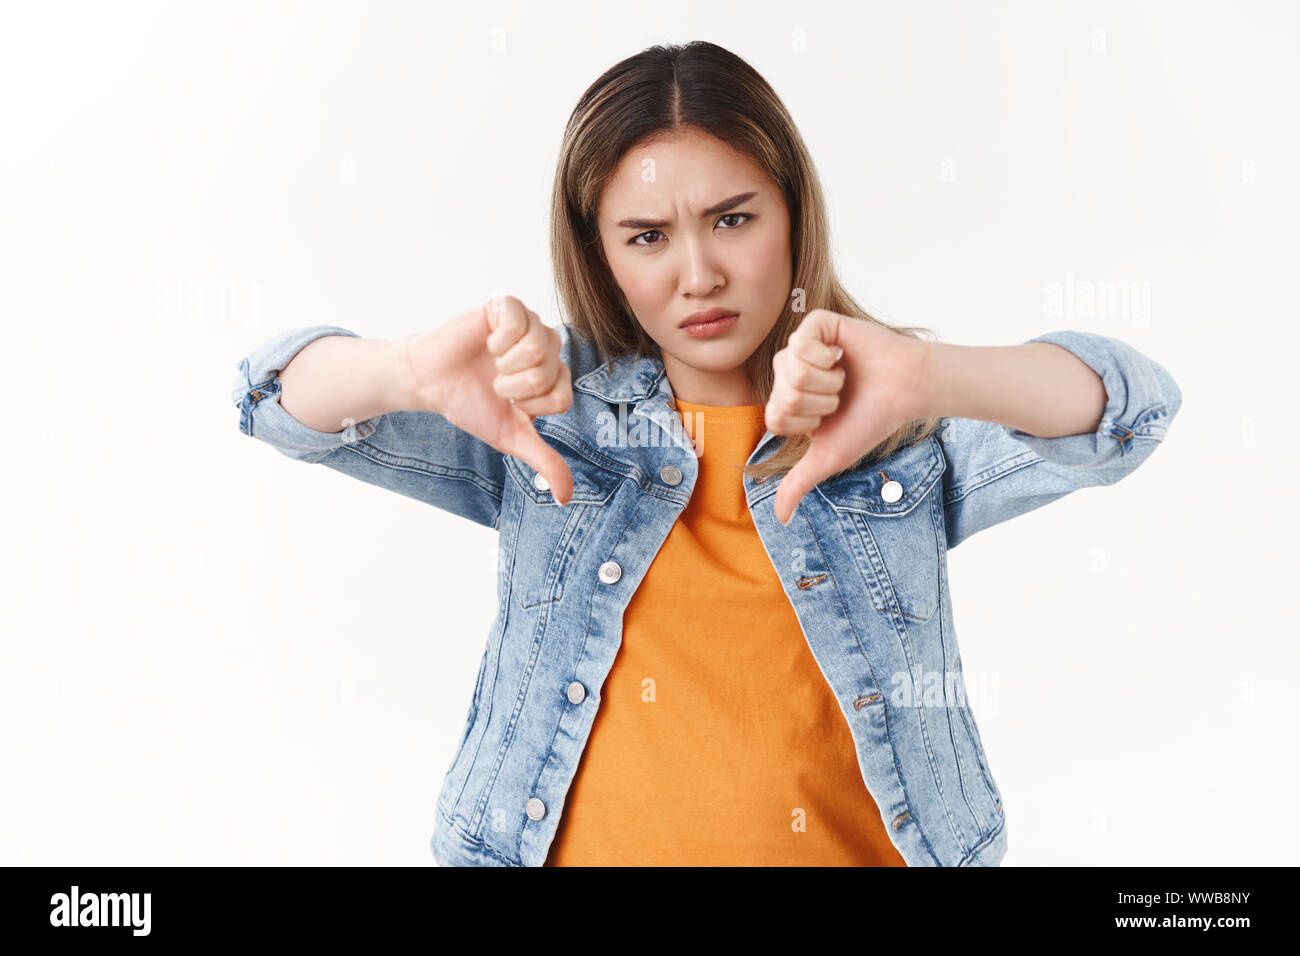 Bad idea wrong choice. Intense displeased angry rebellious asian blond woman express disagree dislike show thumbs down hateful look unwilling see Stock Photo